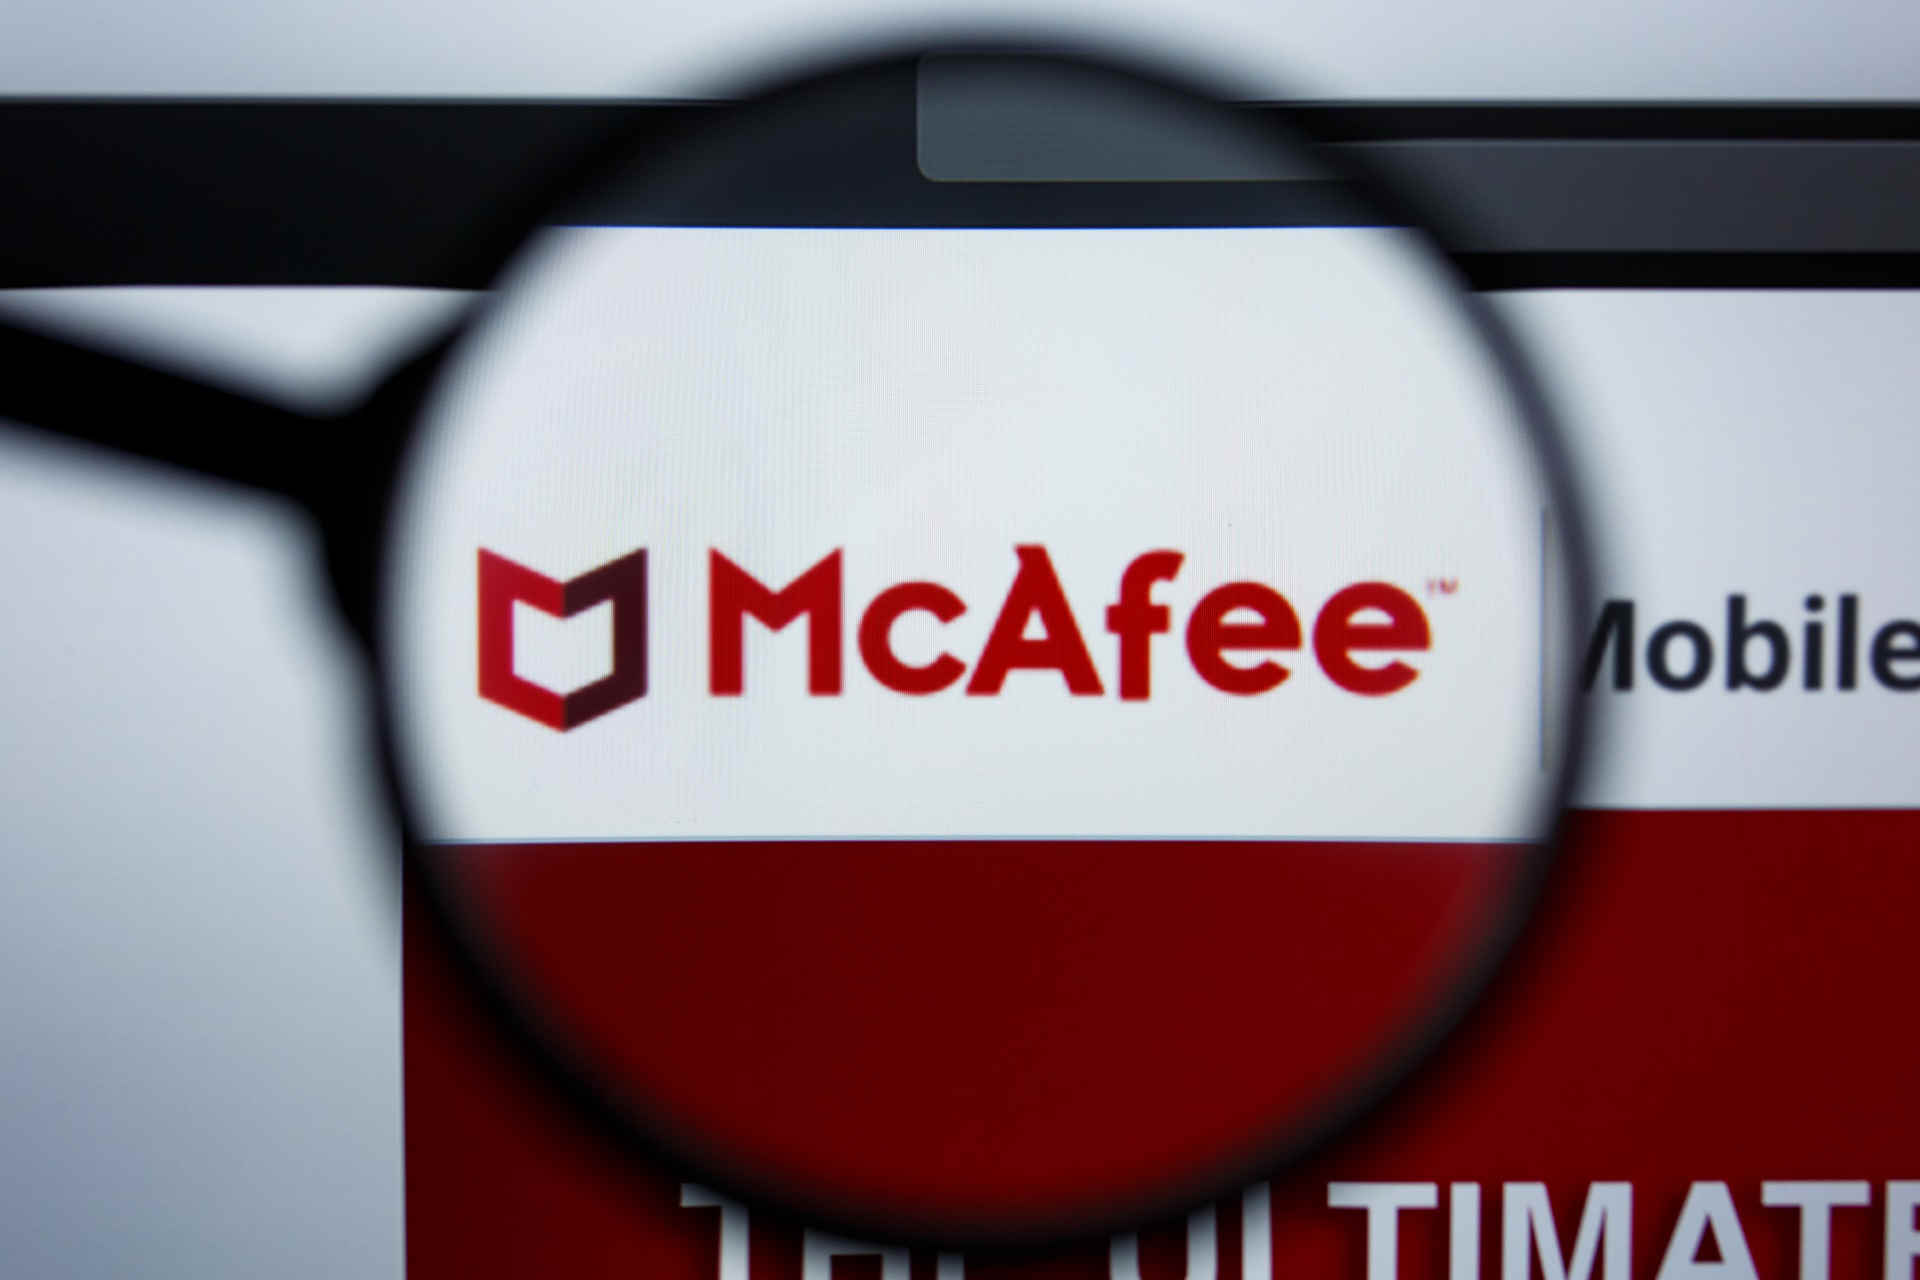 What to do if the McAfee client always shows the system state as inactive